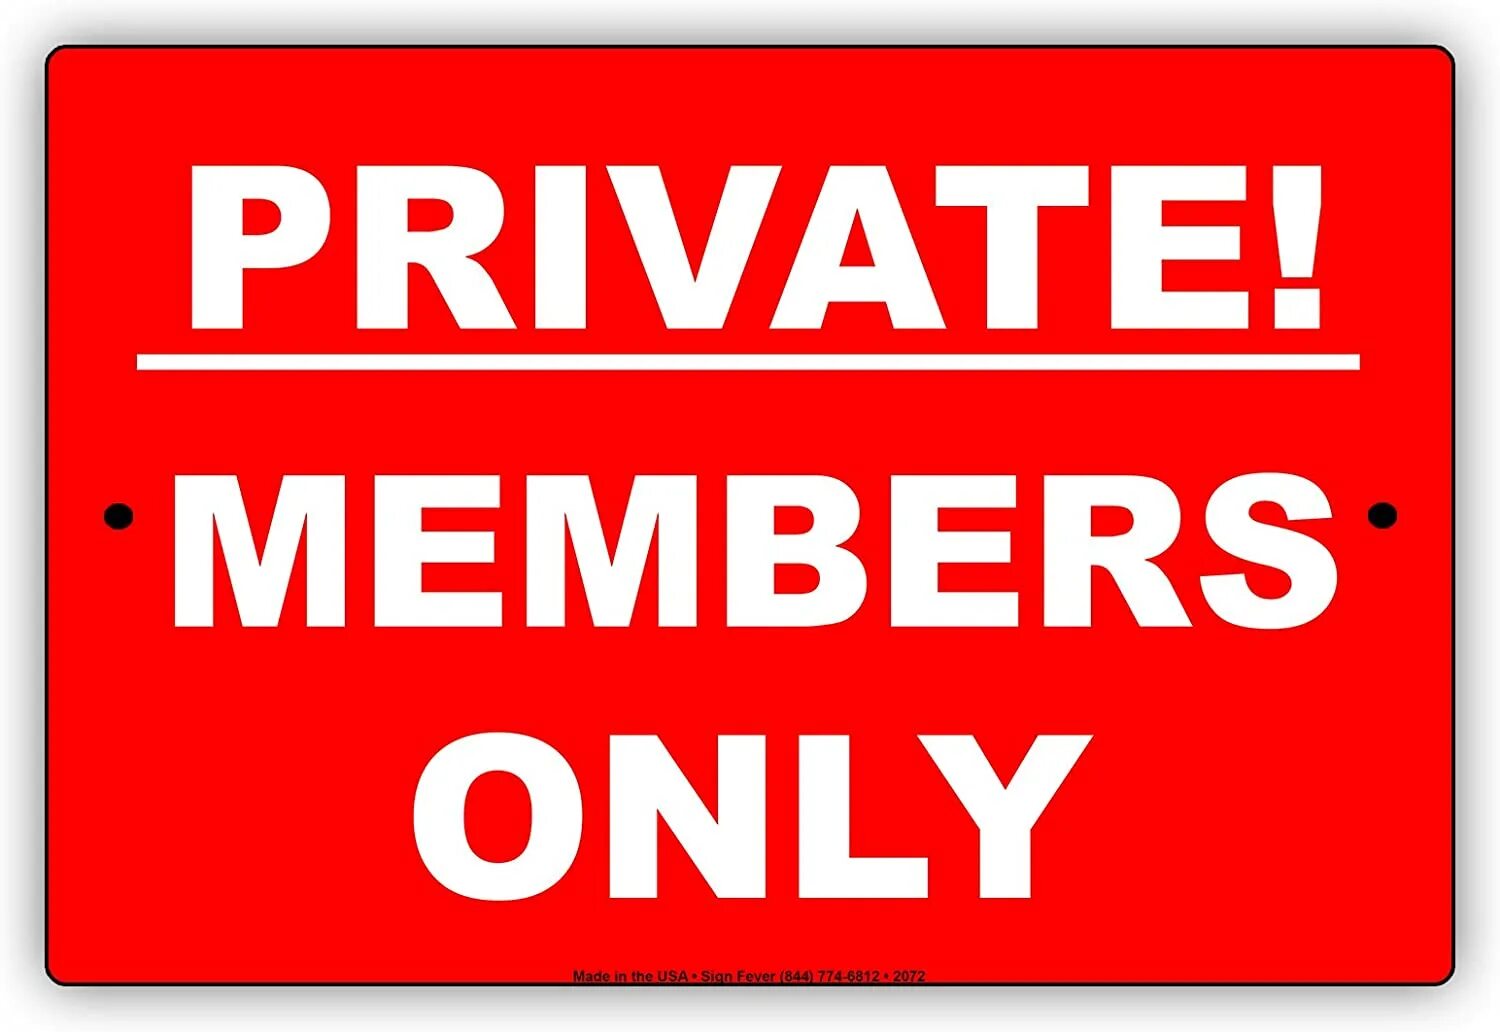 Онли Проперти. Members only. Out private